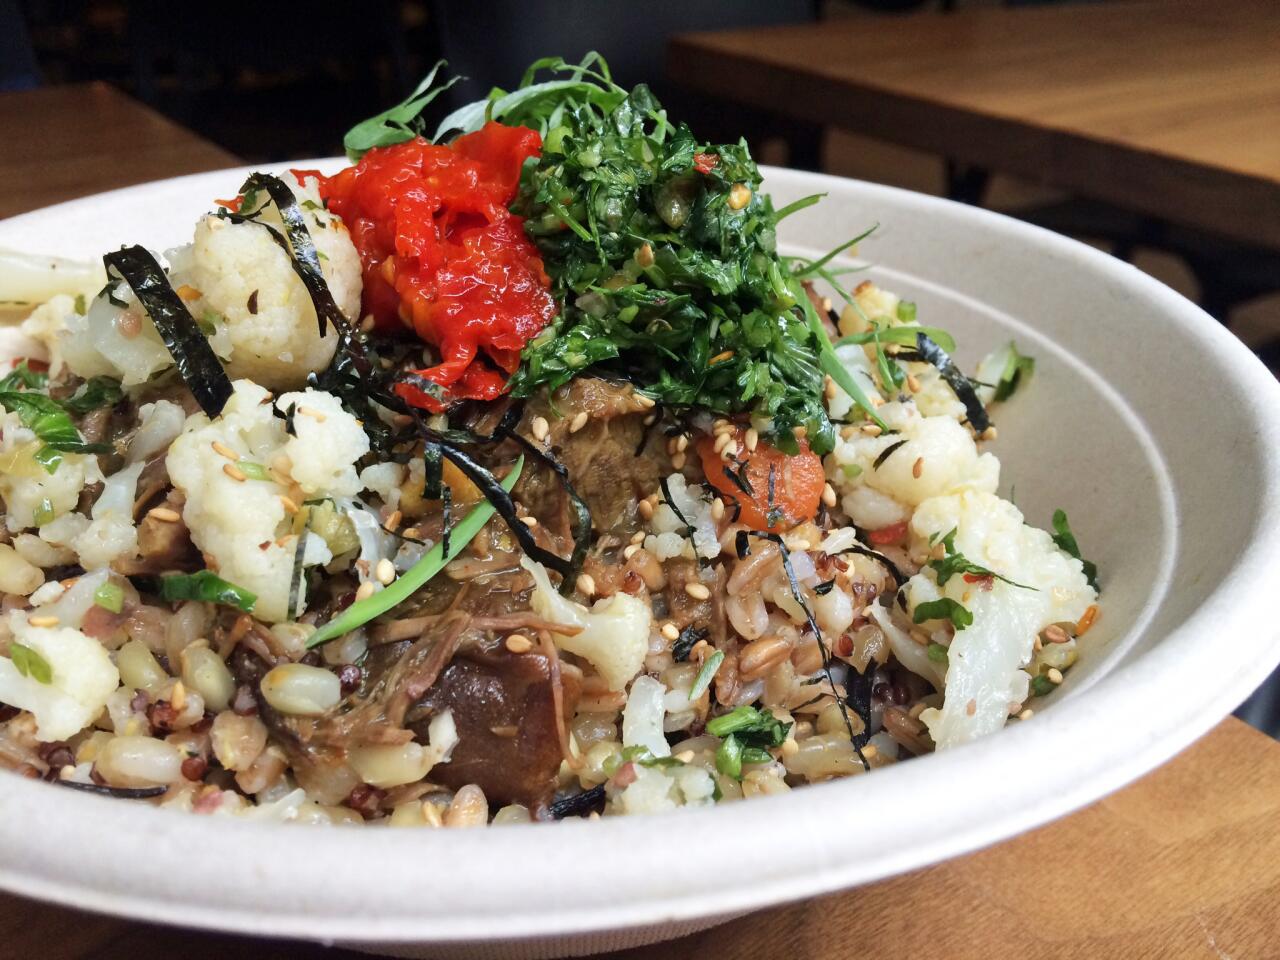 Orsa & Winston is now serving grain bowls for lunch. Pictured is a beef curry grain bowl.